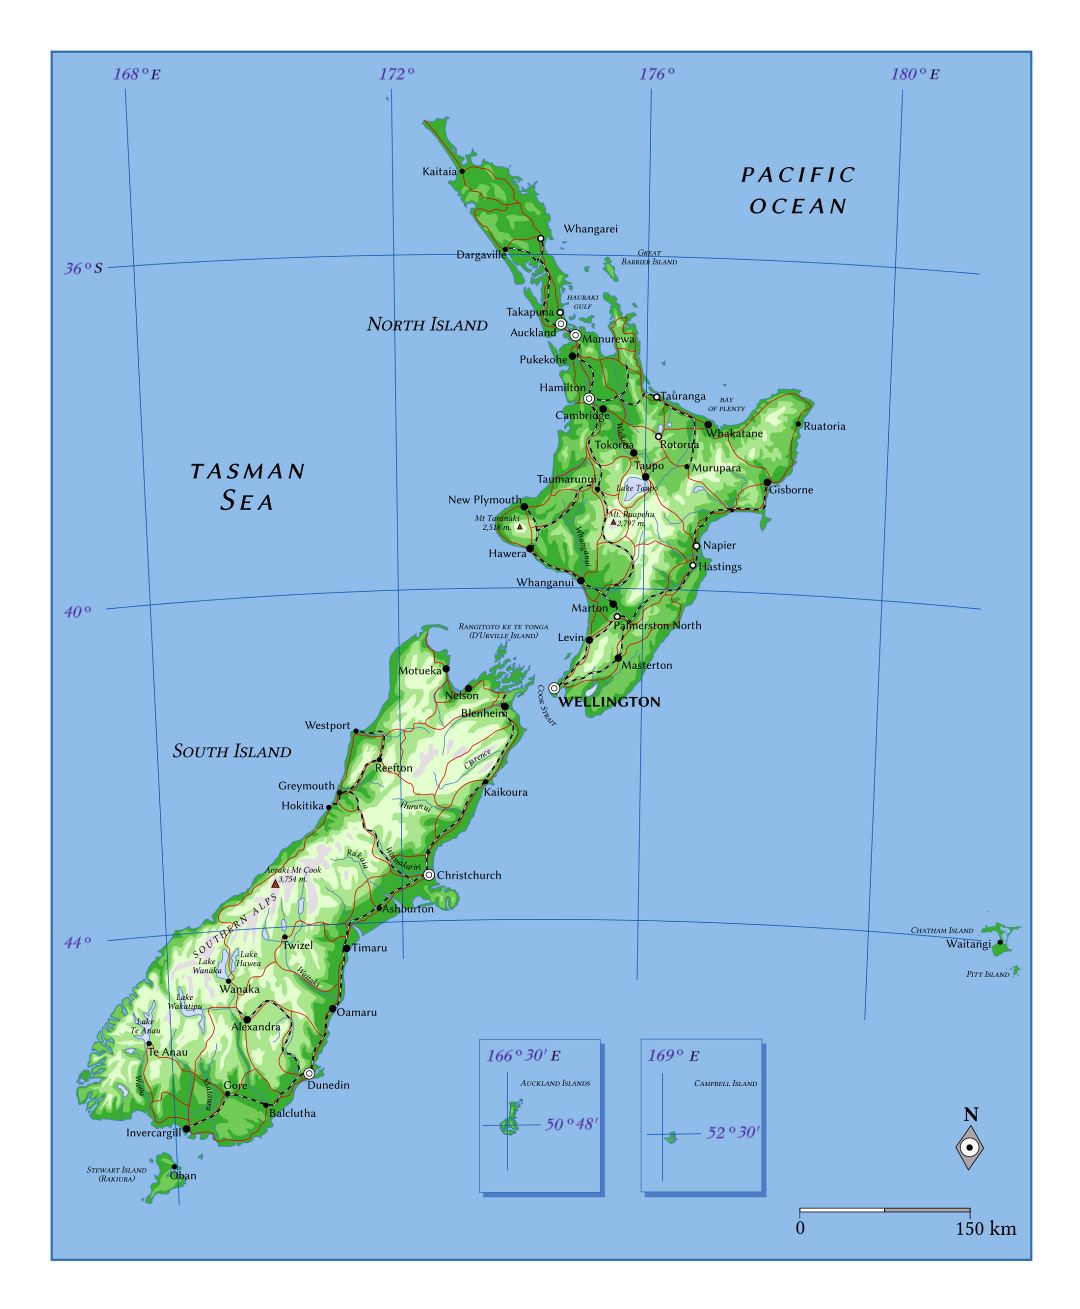 Large elevation map of New Zealand with roads, railroads and cities